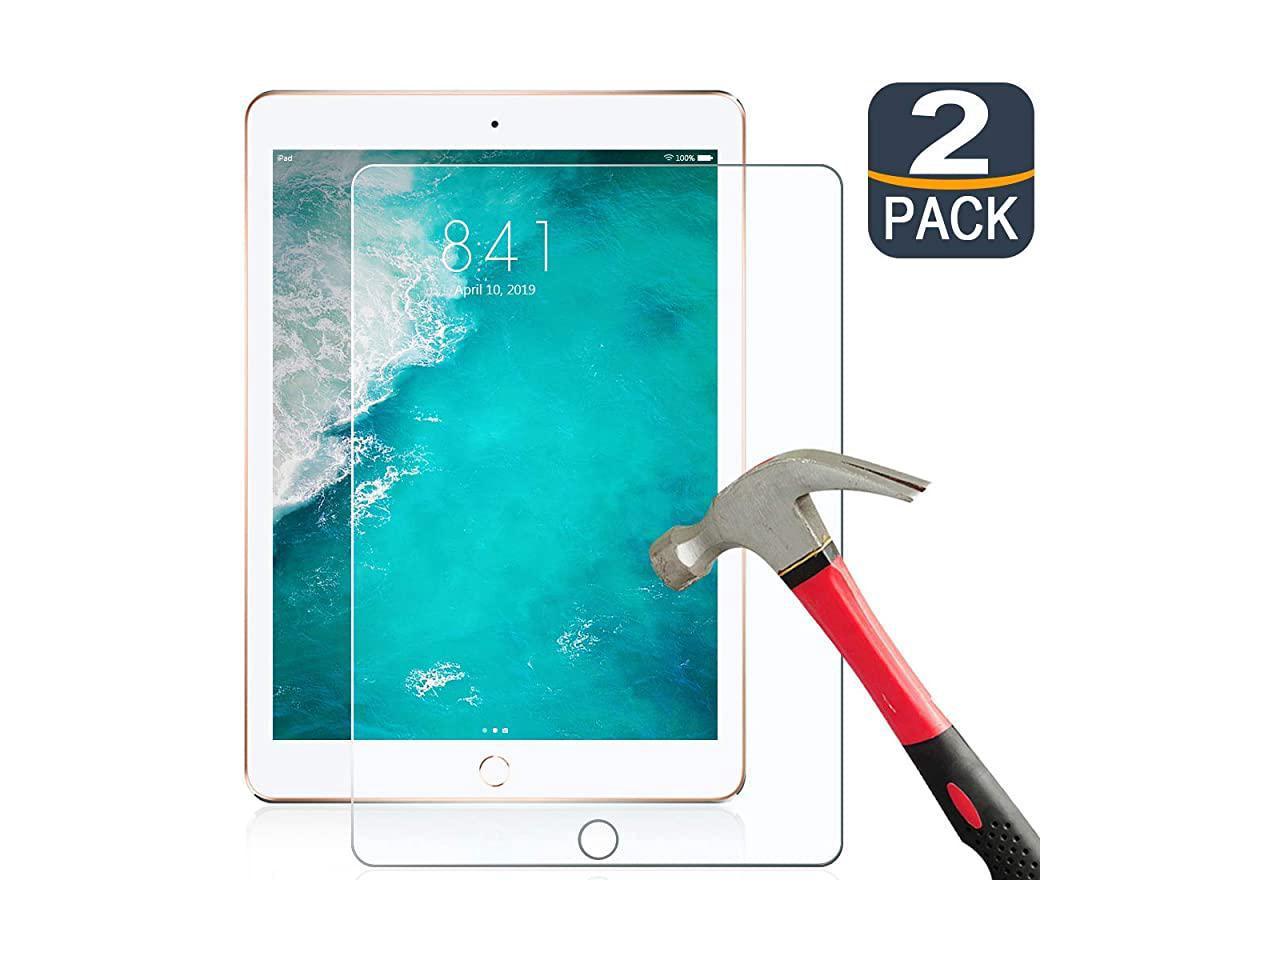 Clear ZNITRO Tempered Glass Screen Protector For Apple IPad Air/Air 2/Pro 9.7" 